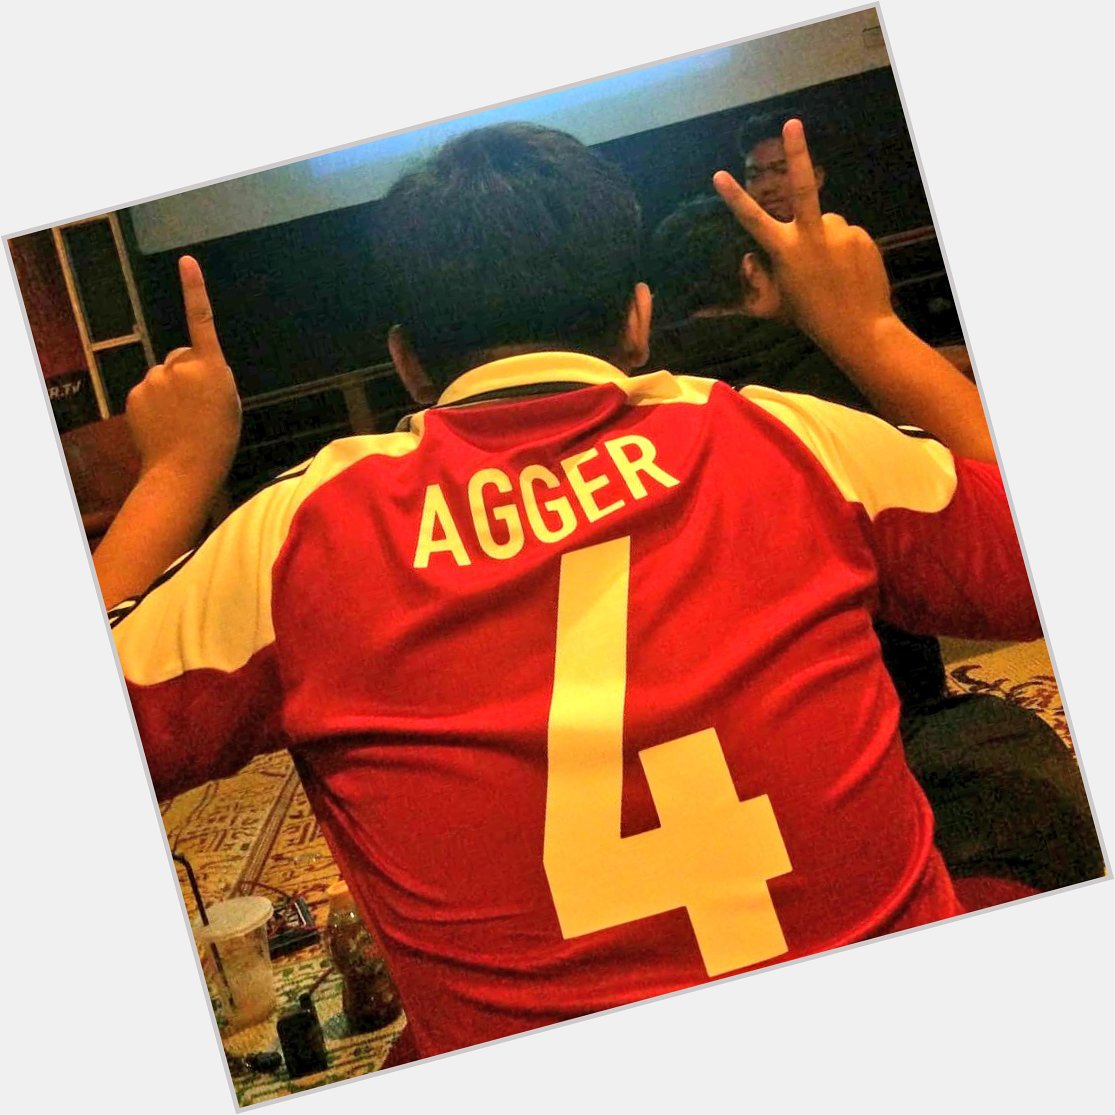 Happy birthday Daniel Agger, one of the football players that I will tell my son in the future 